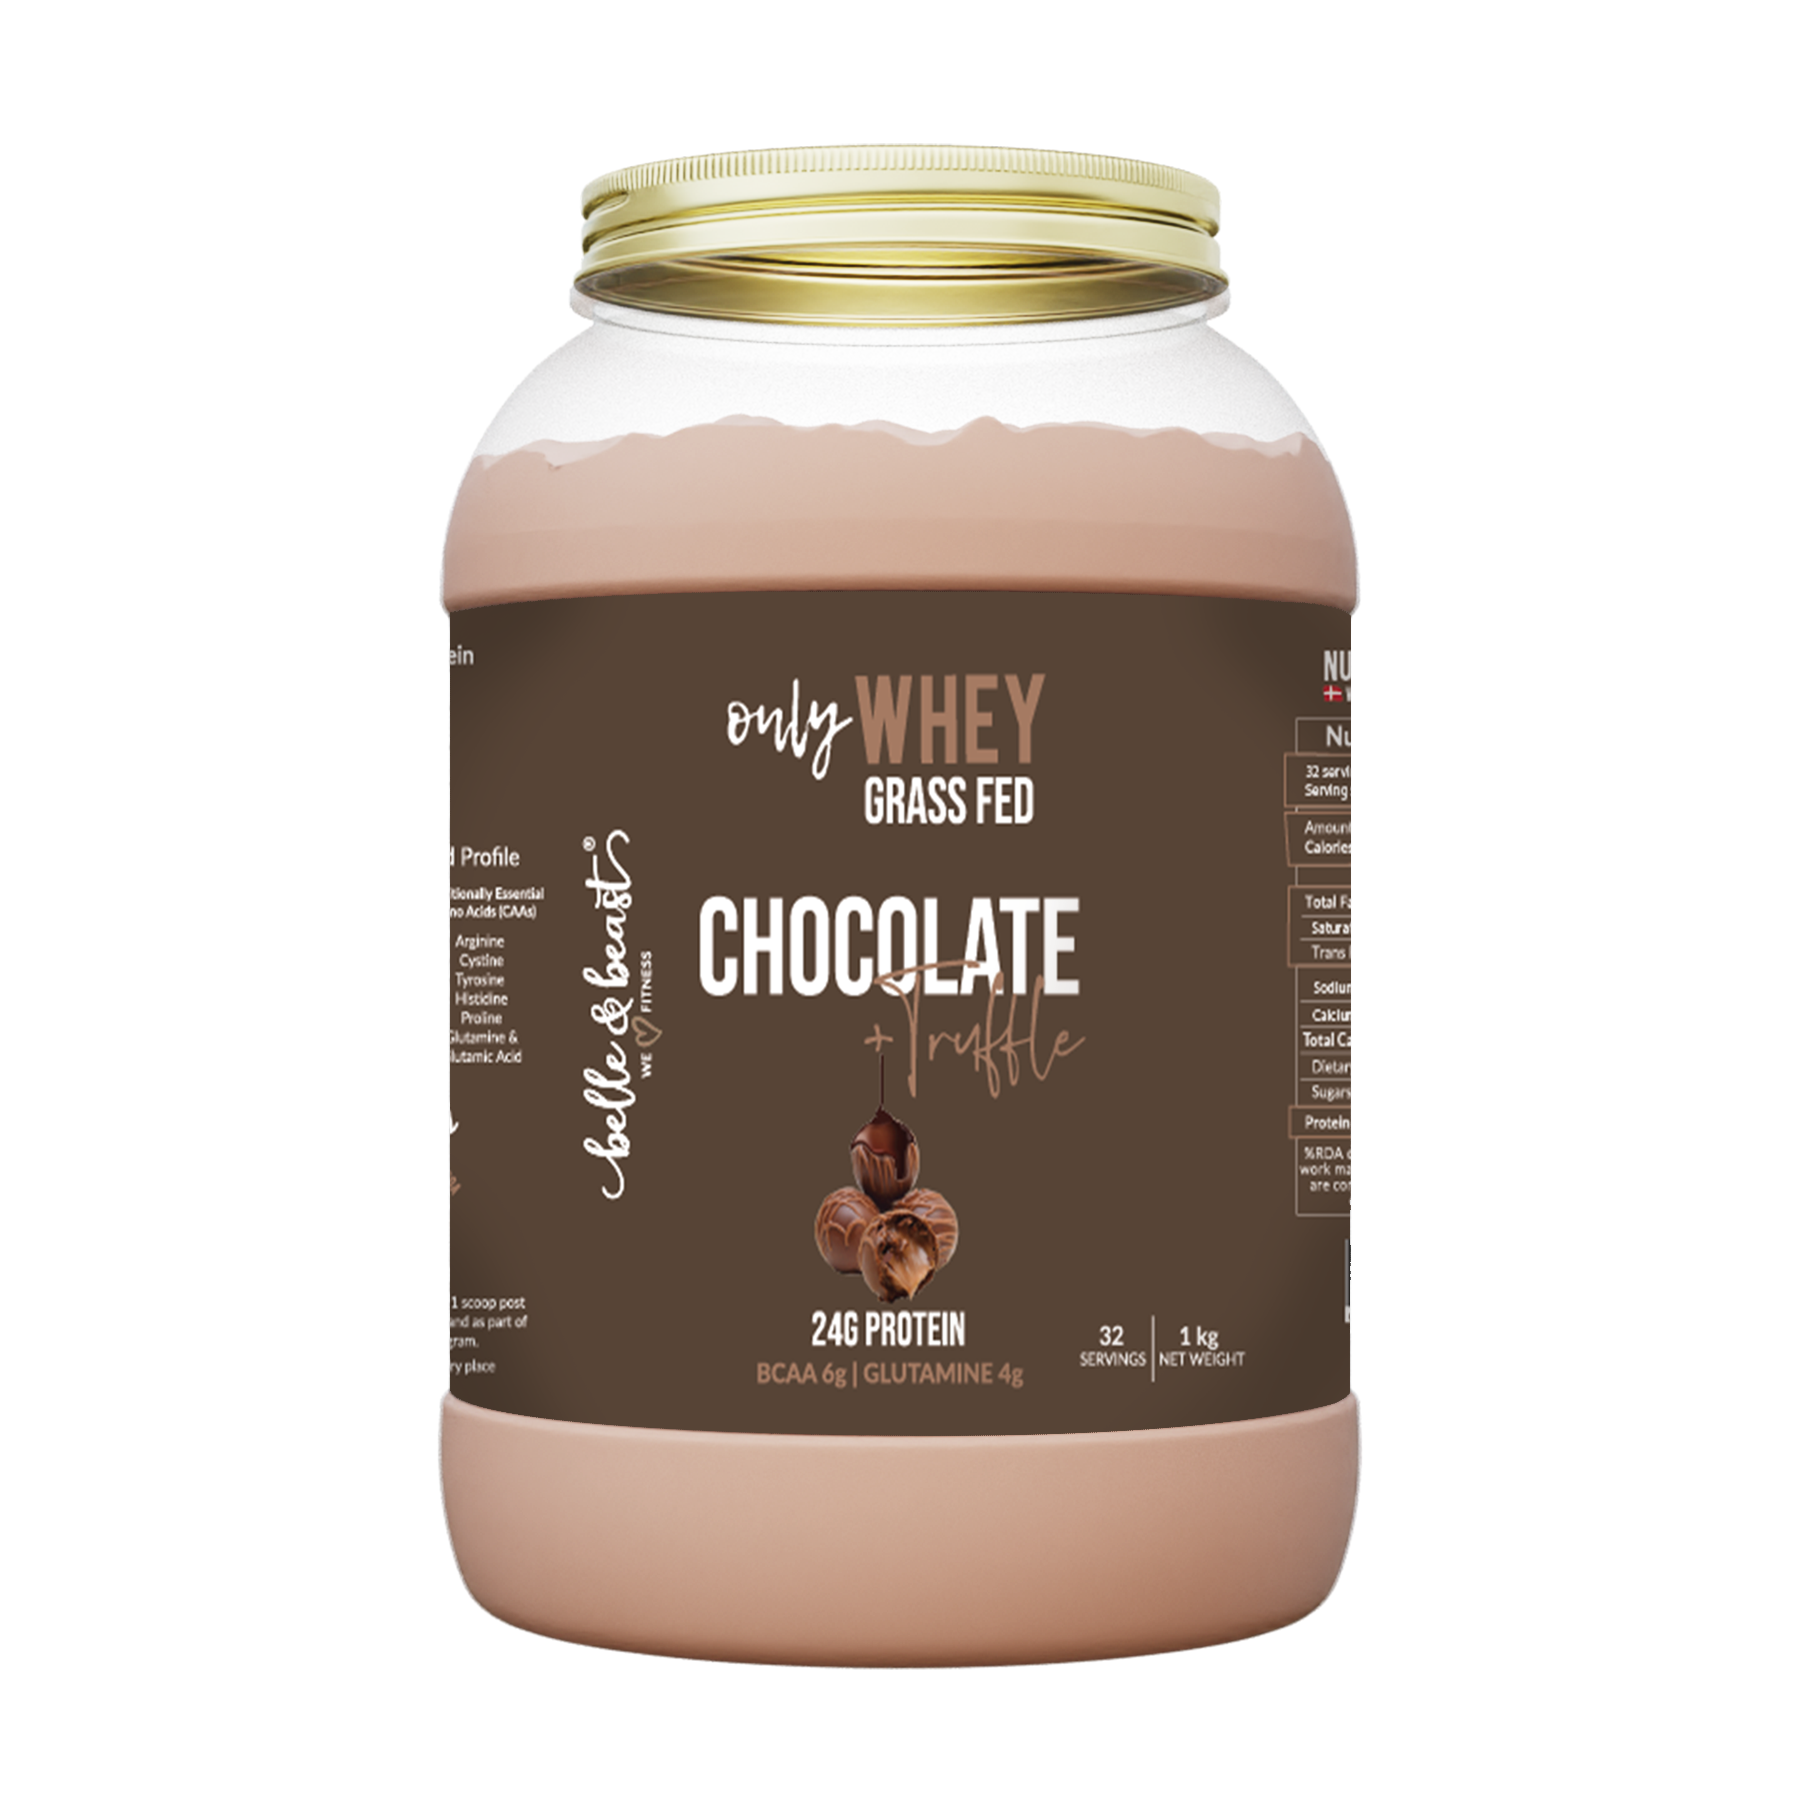 Only WHEY - Chocolate Truffle | 1kg